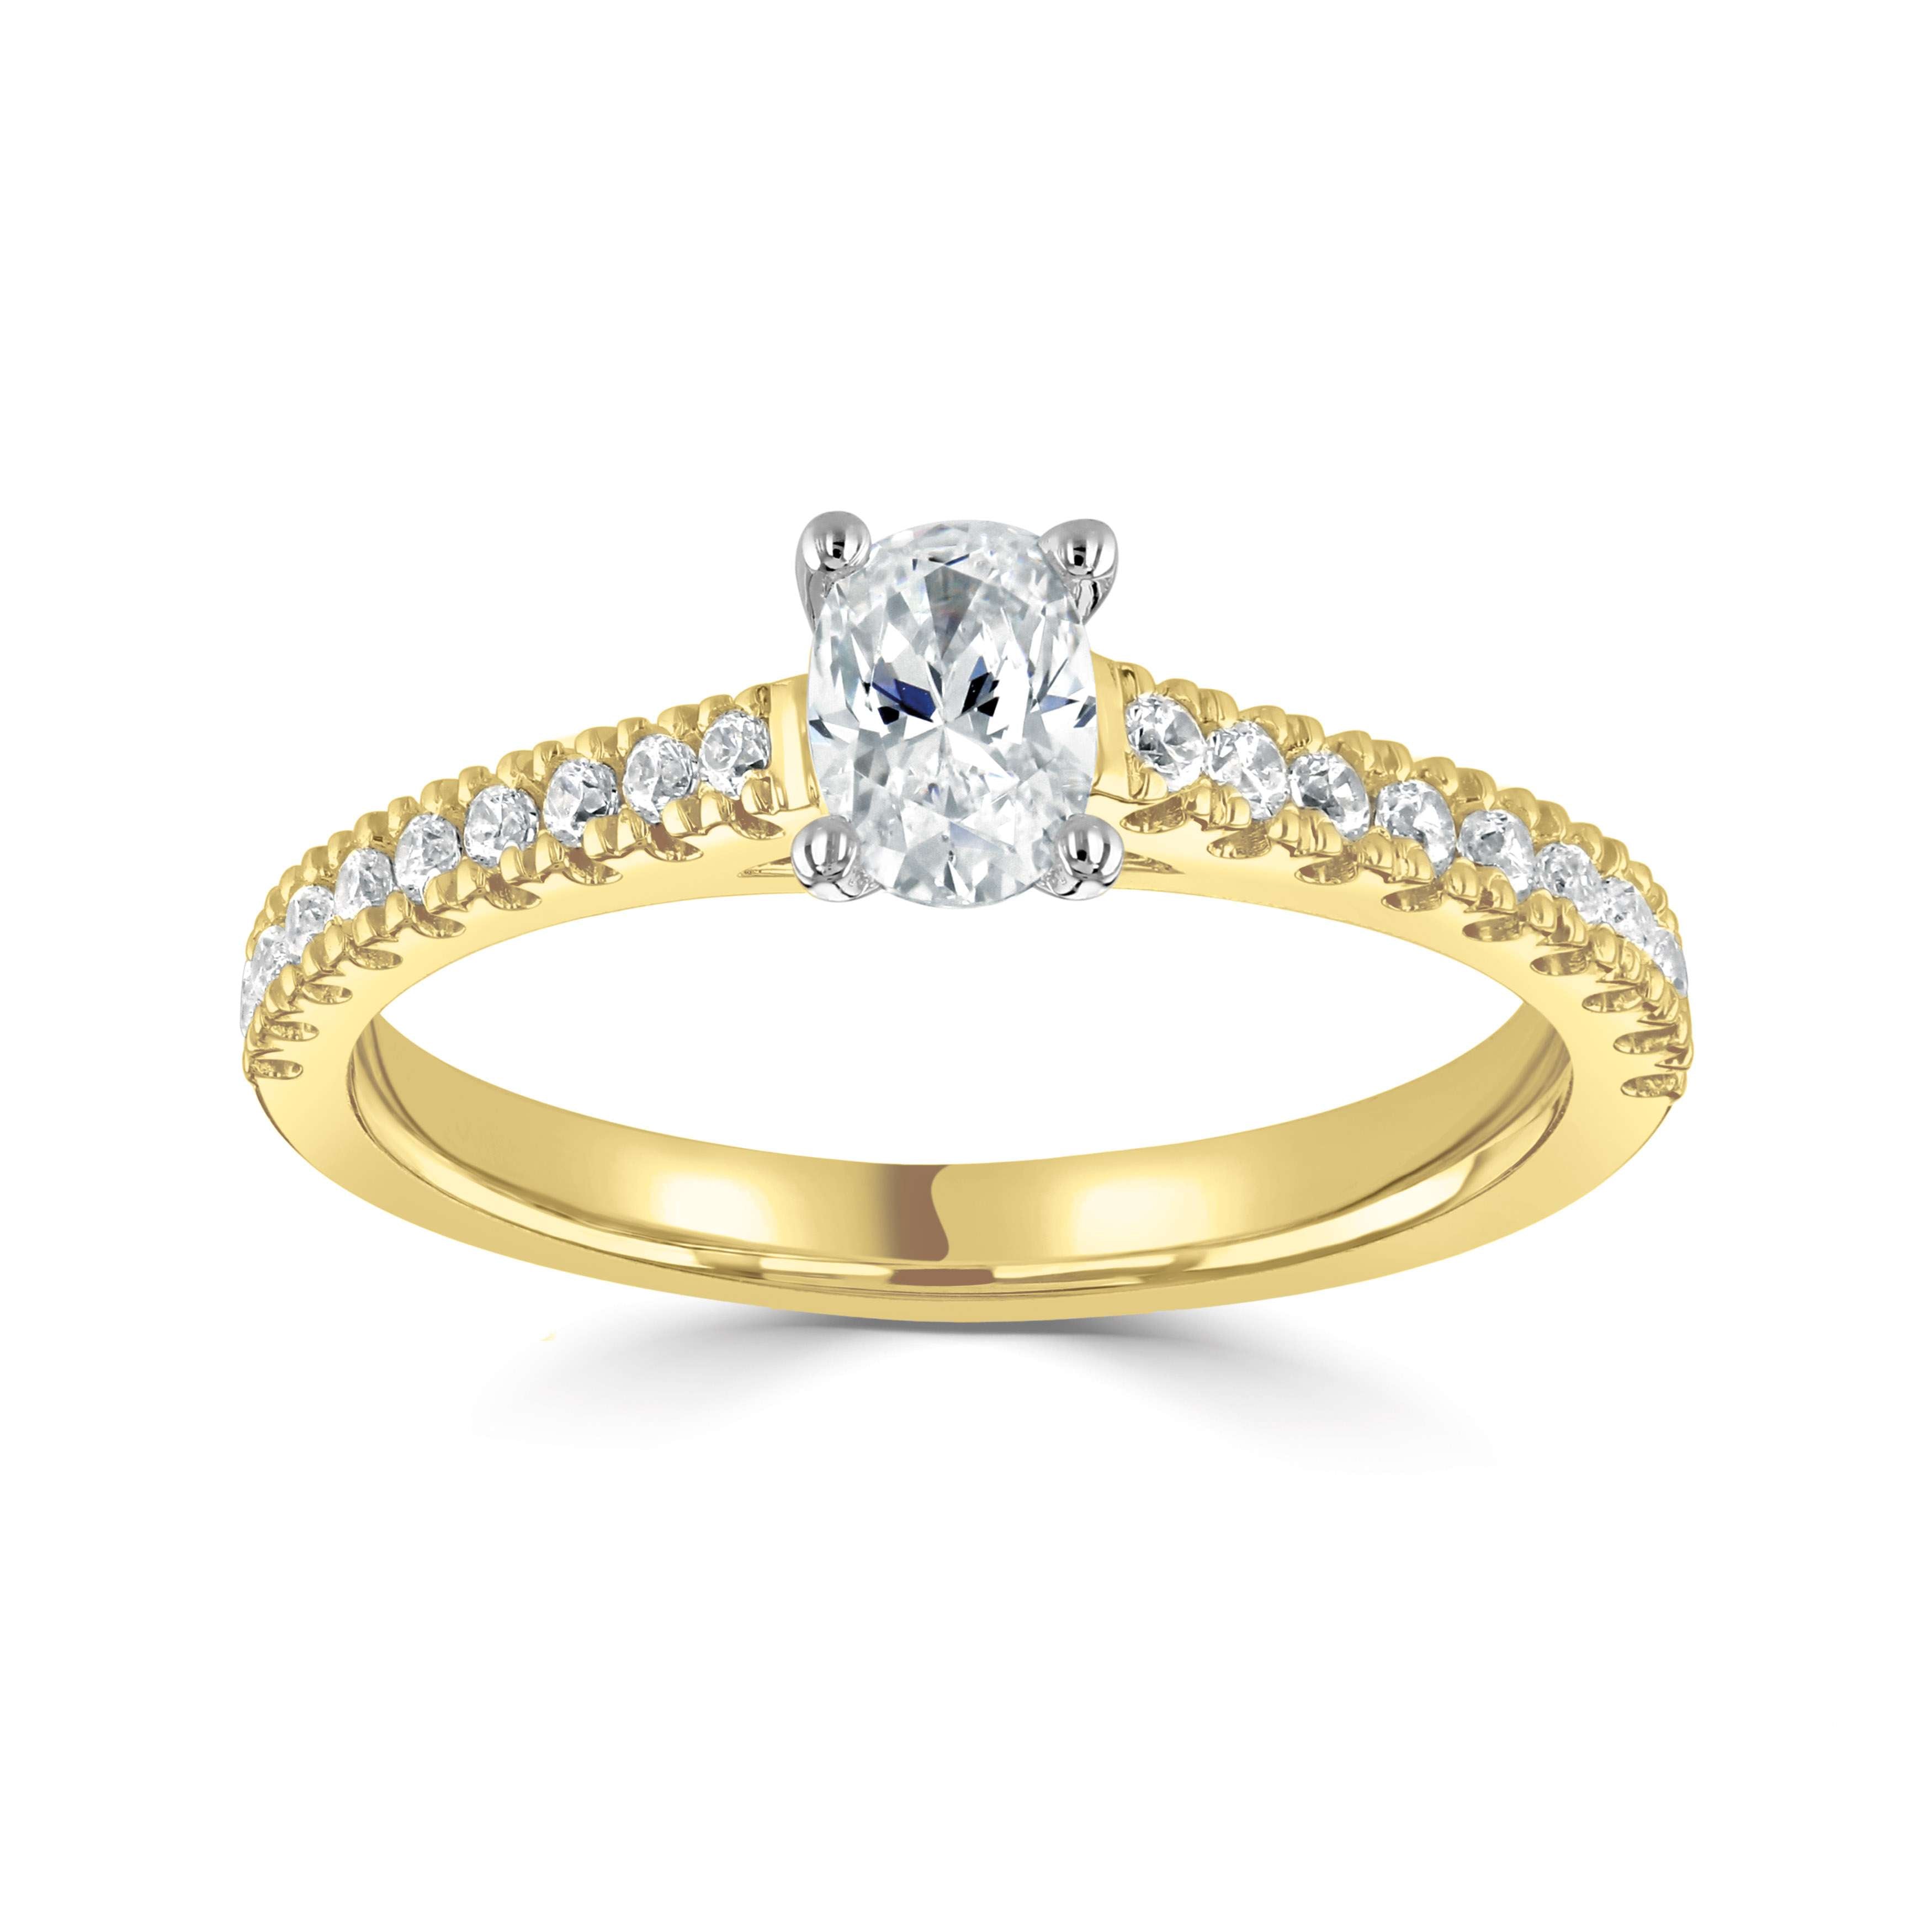 Averie *Select an Oval Diamond 0.50ct or above